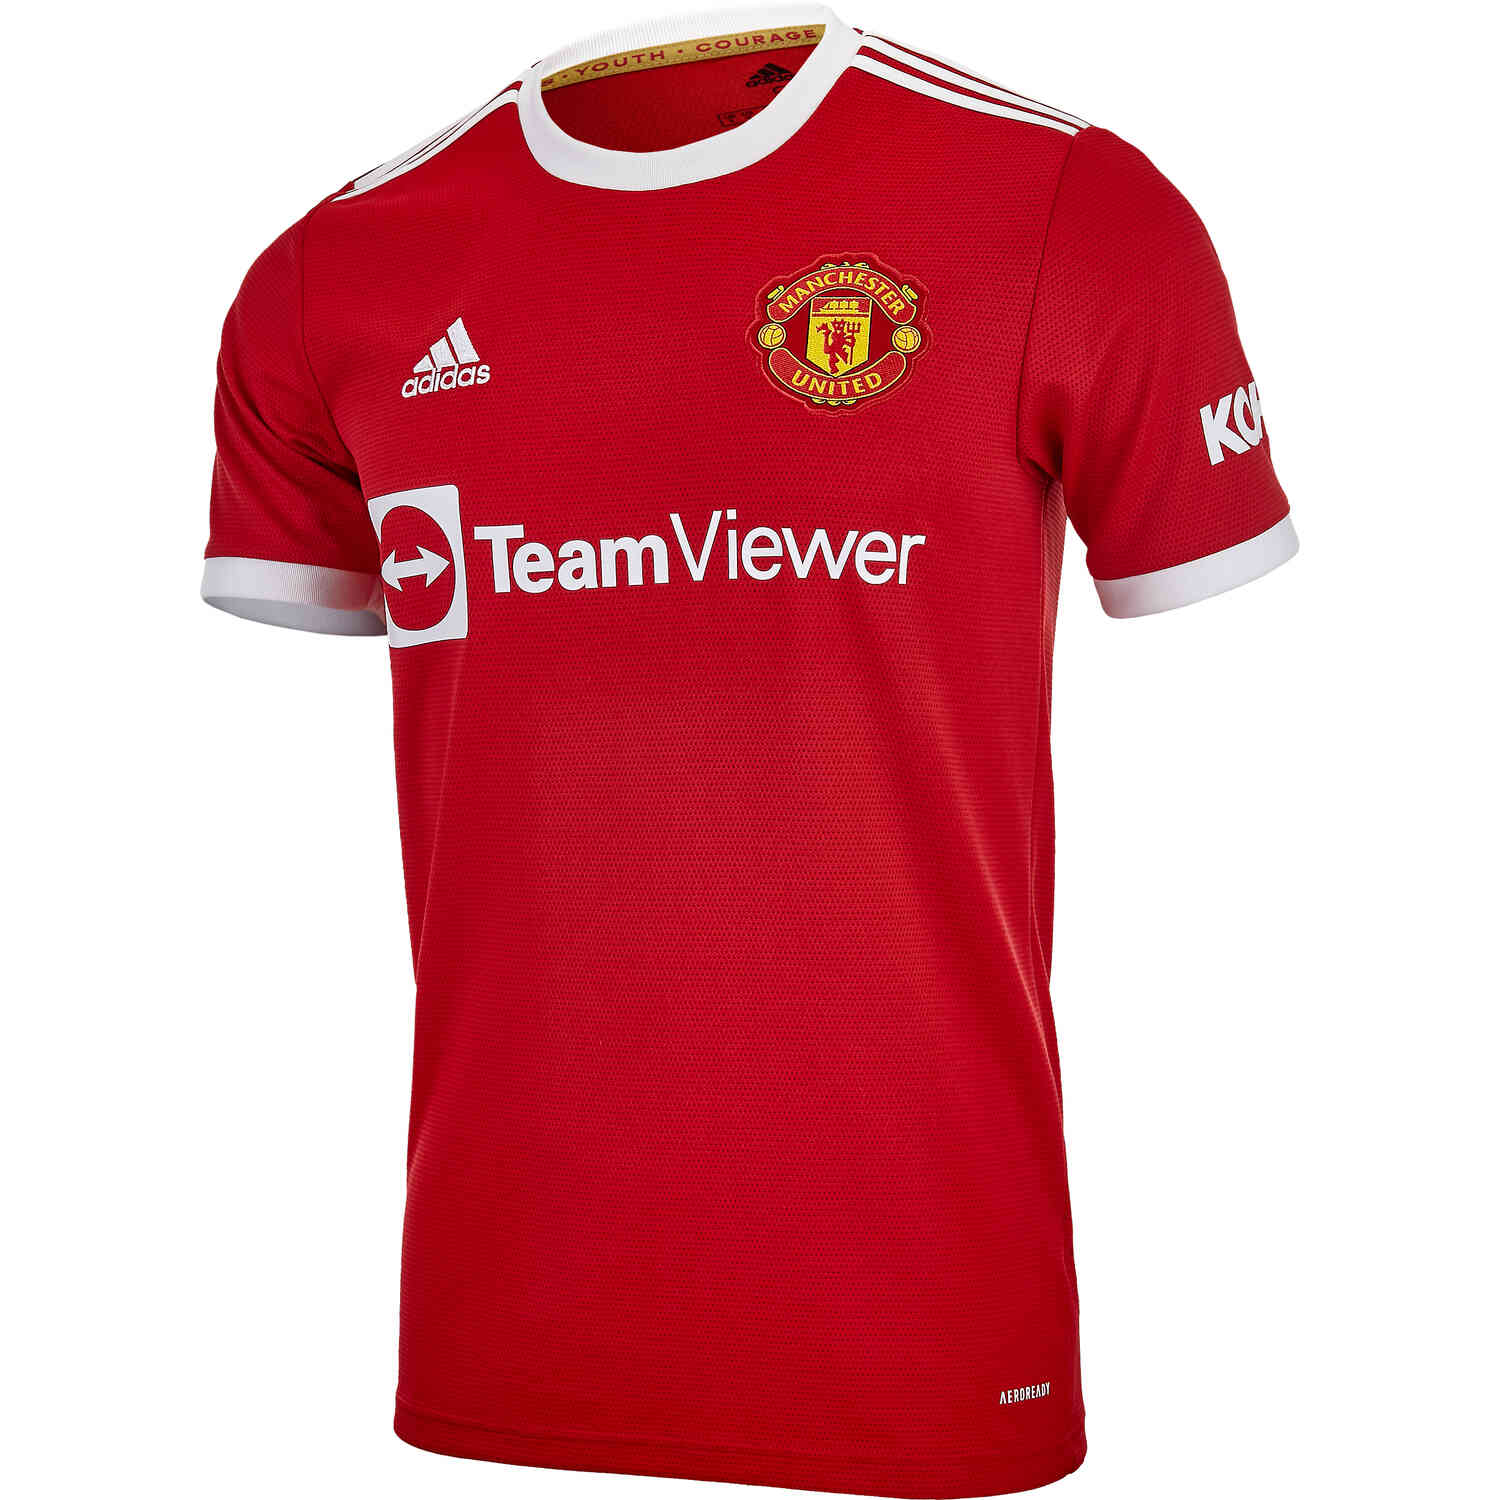 2021/22 adidas Manchester United Home Jersey - SoccerPro